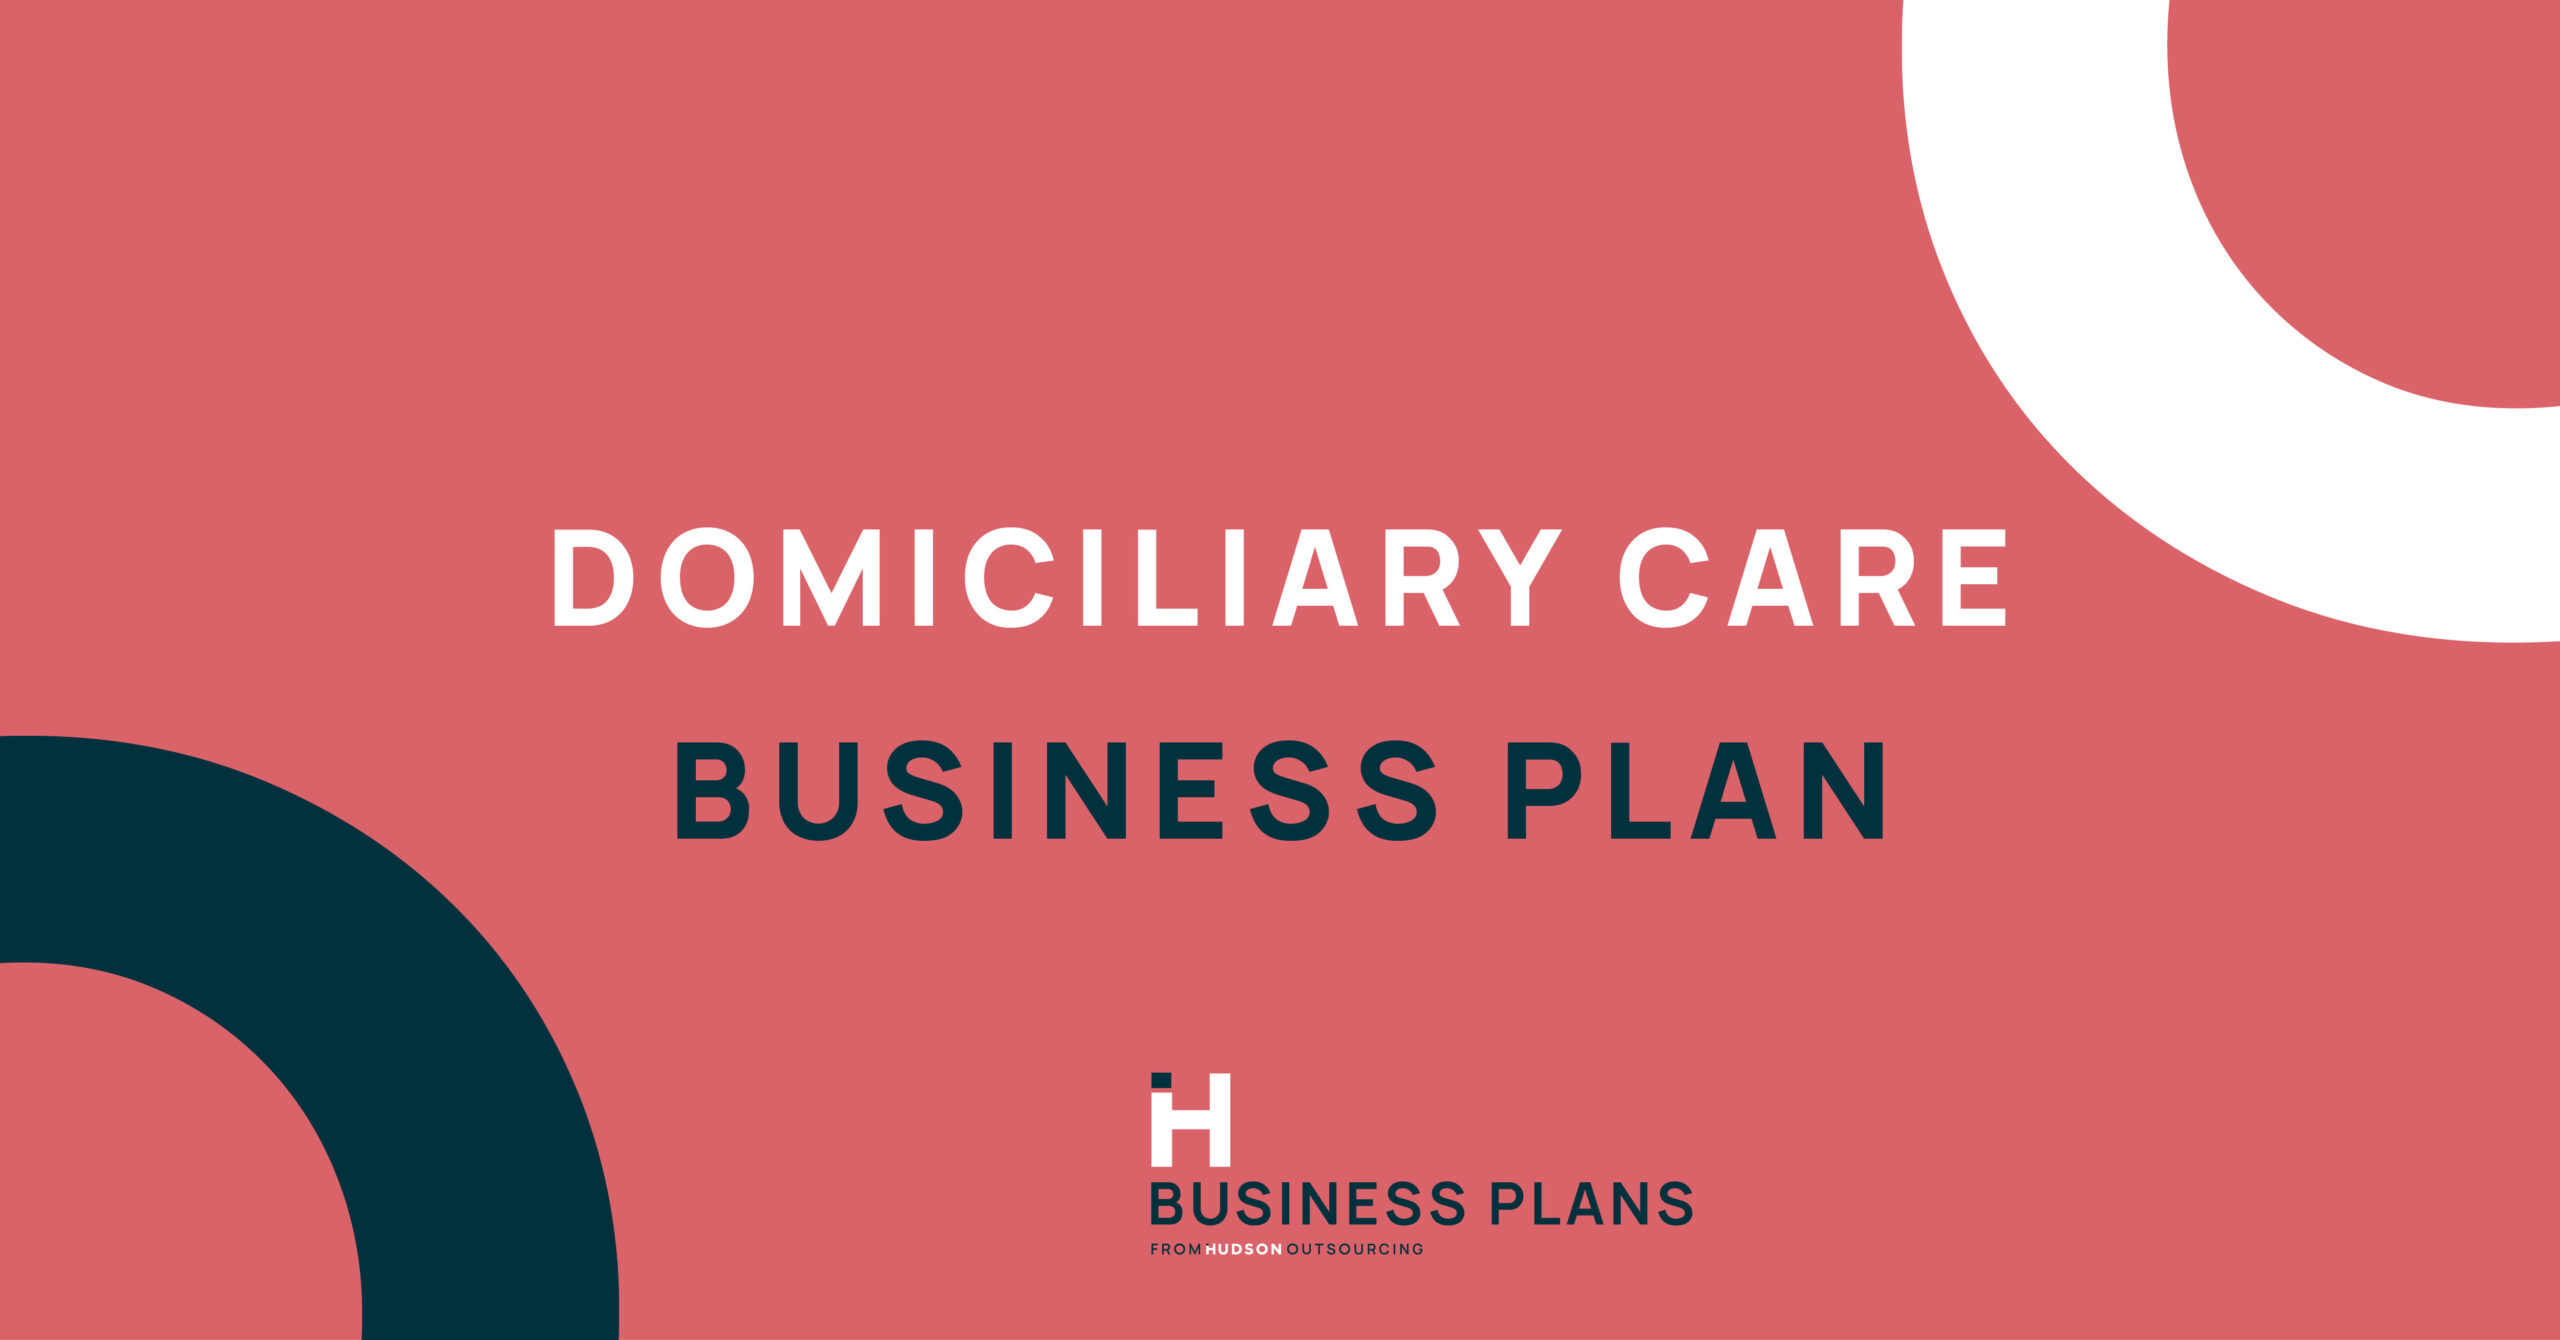 business plan for domiciliary care agency pdf